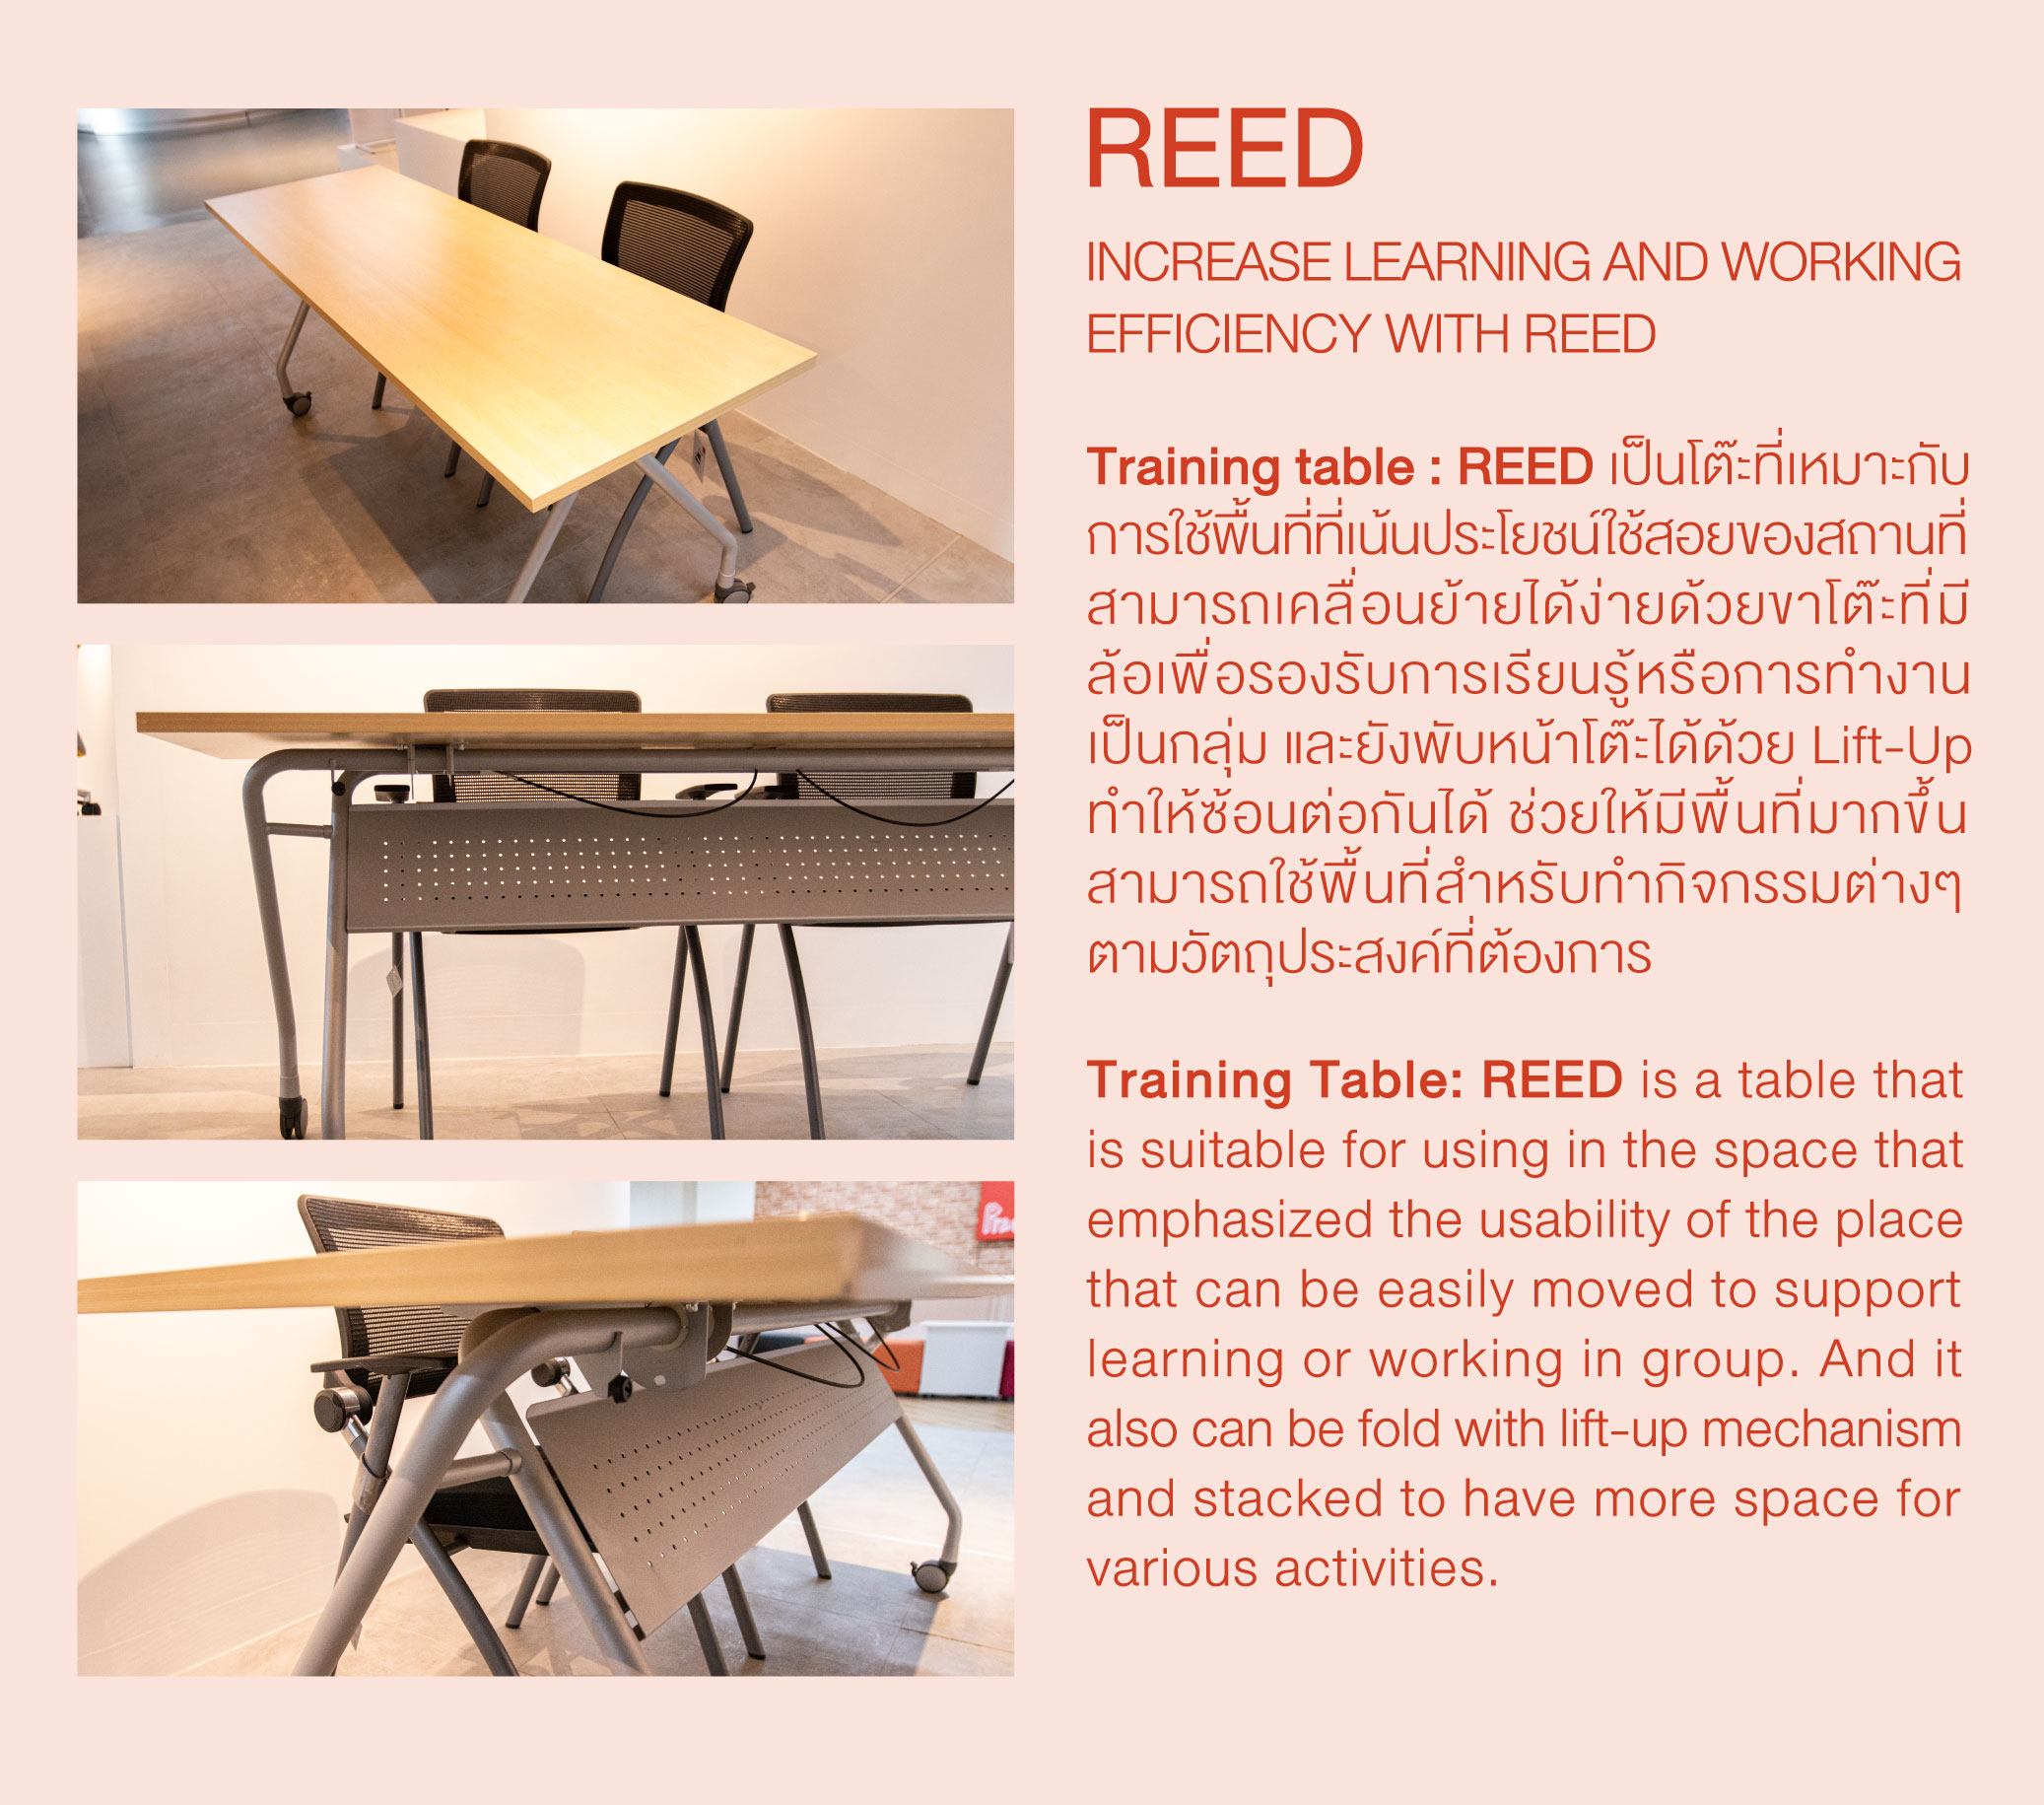 Reed Table